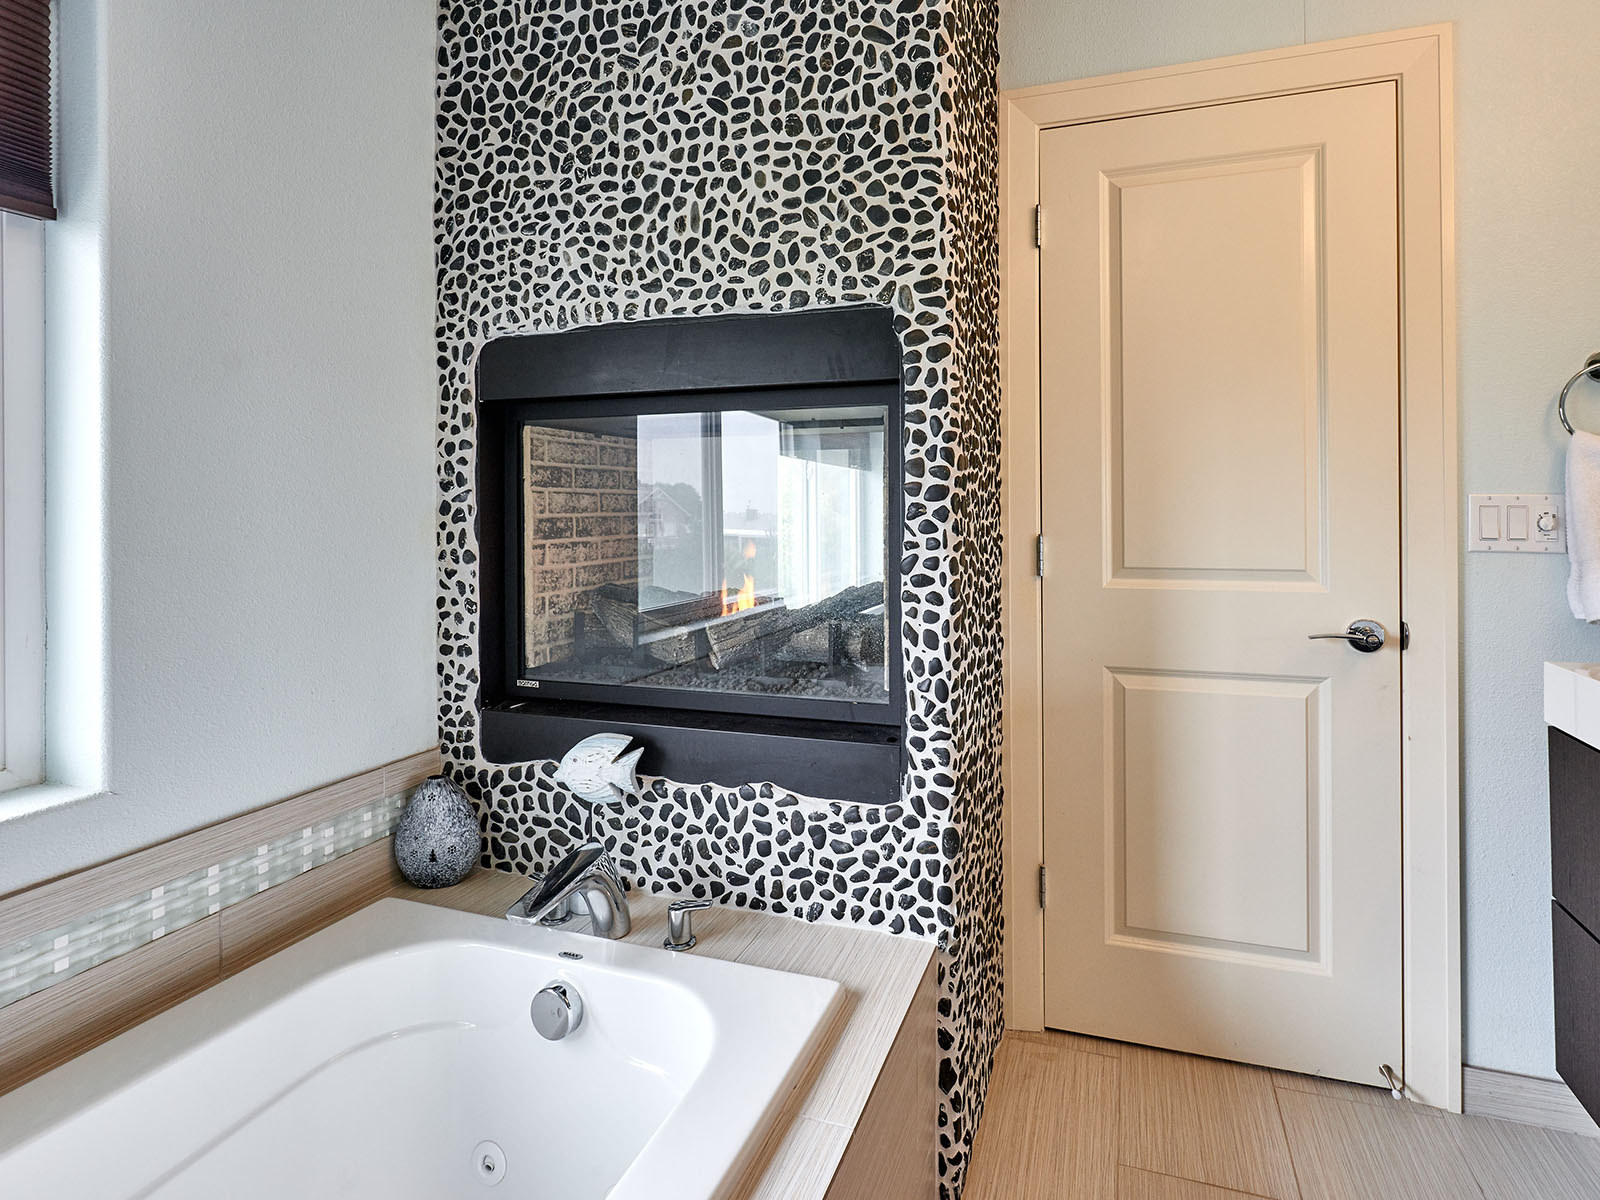 Bathtub with fireplace above